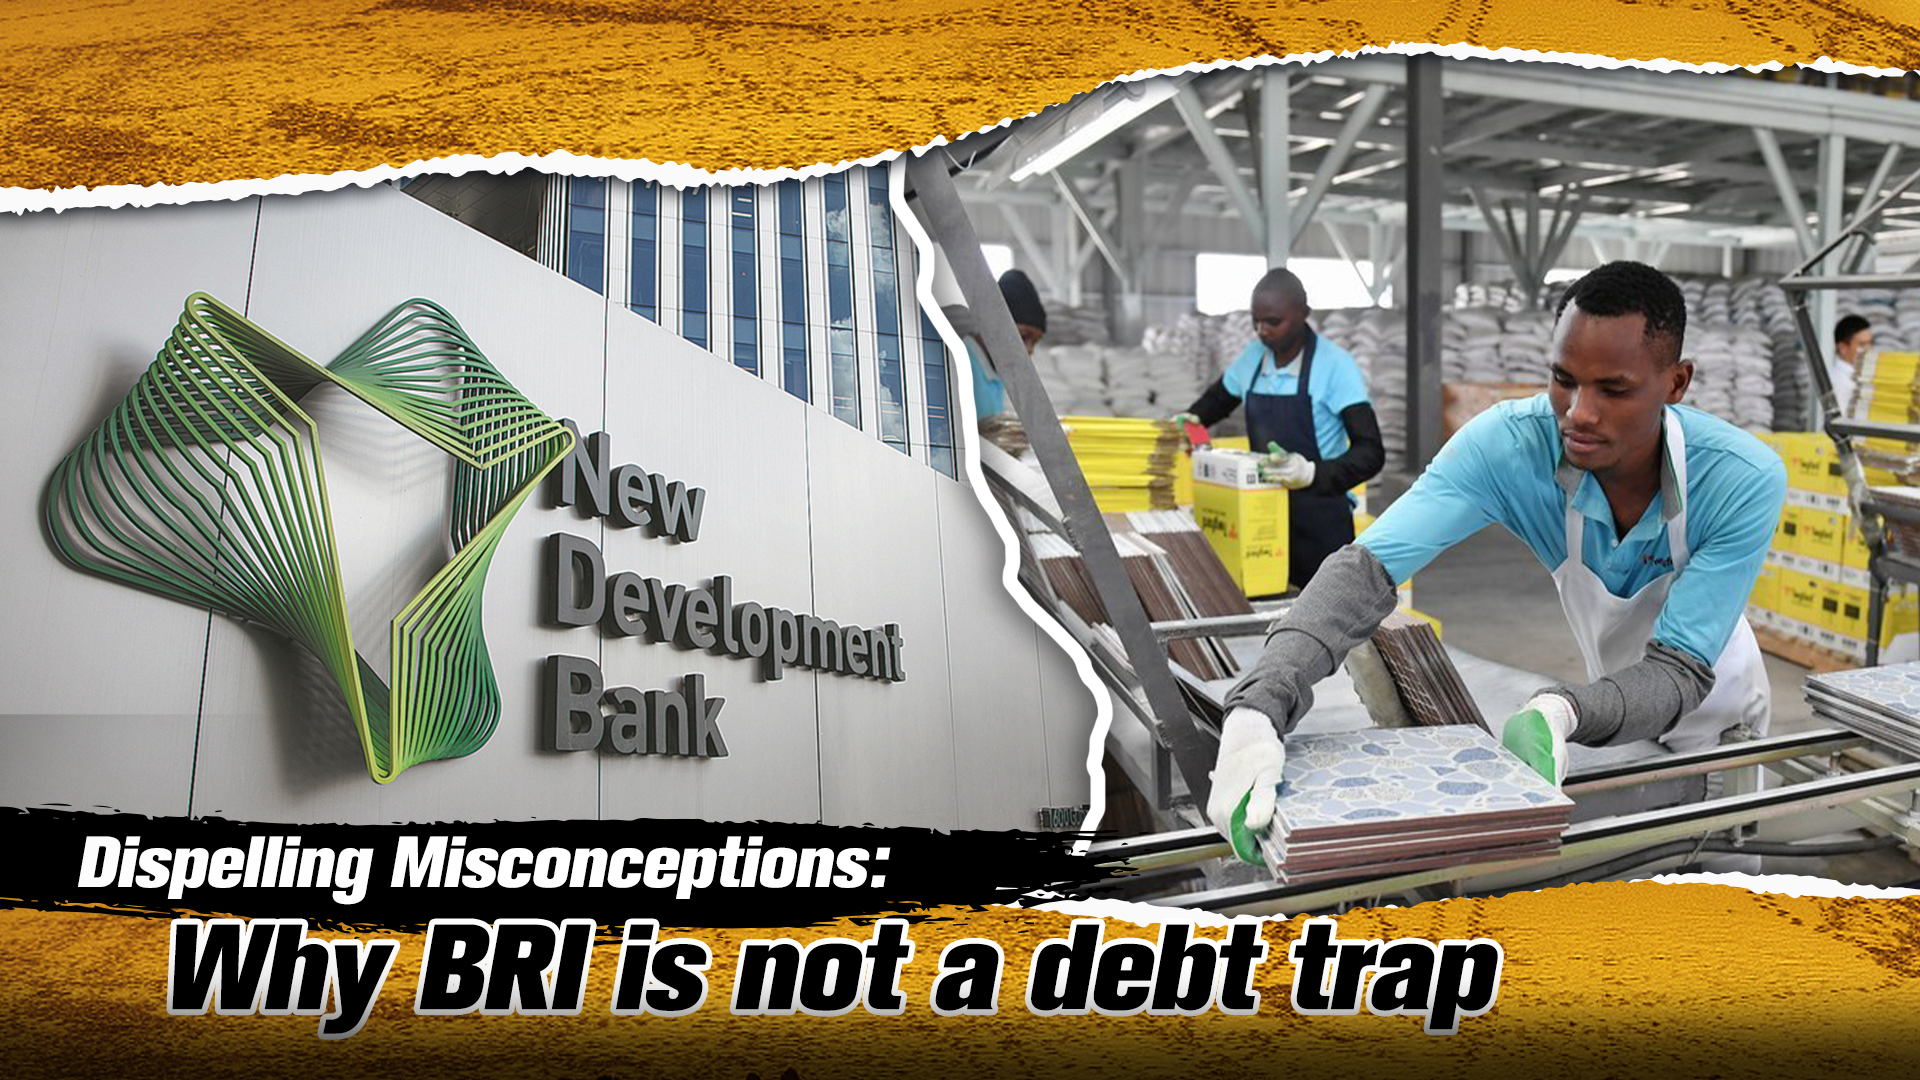 Dispelling Misconceptions: Why BRI is not a debt trap